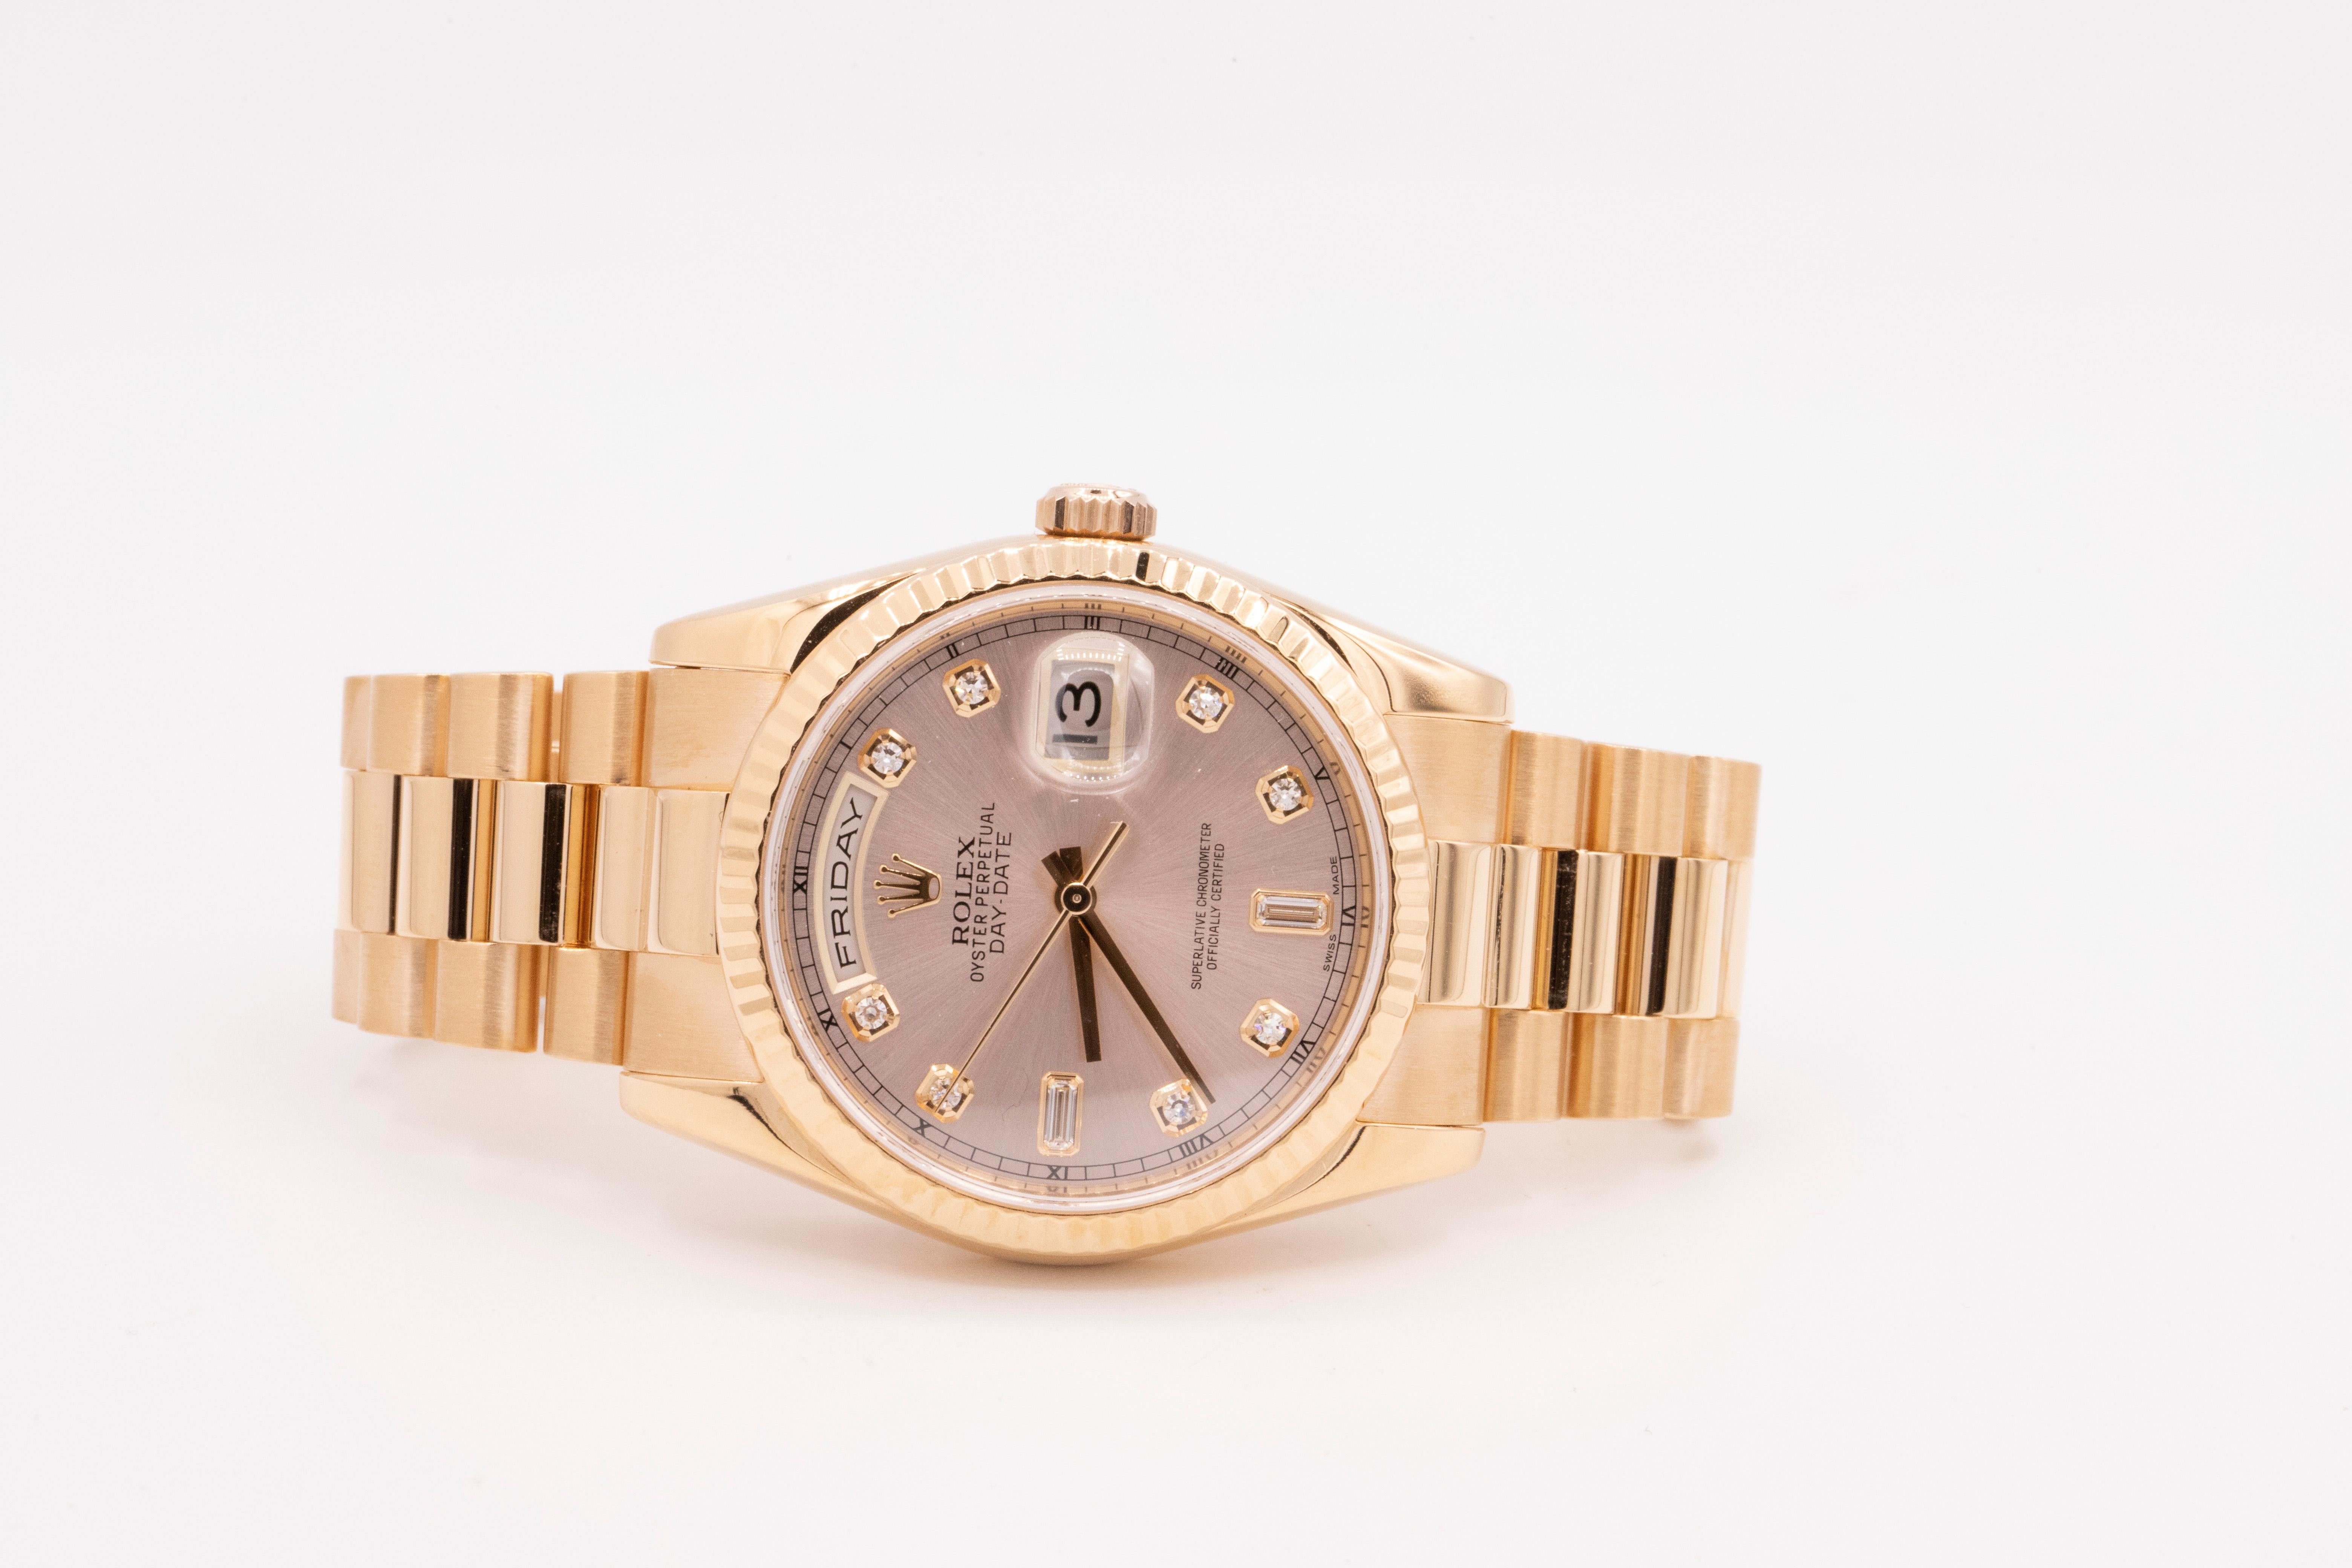 18kt Rose Gold Day-Date size 36mm. Champagne diamond dial with a fluted bezel and a president bracelet. Classic Day-Date style. The date is at 3 o'clock position and the day is at the 12 o'clock position. Circa 2002. No Box or Paperwork. 